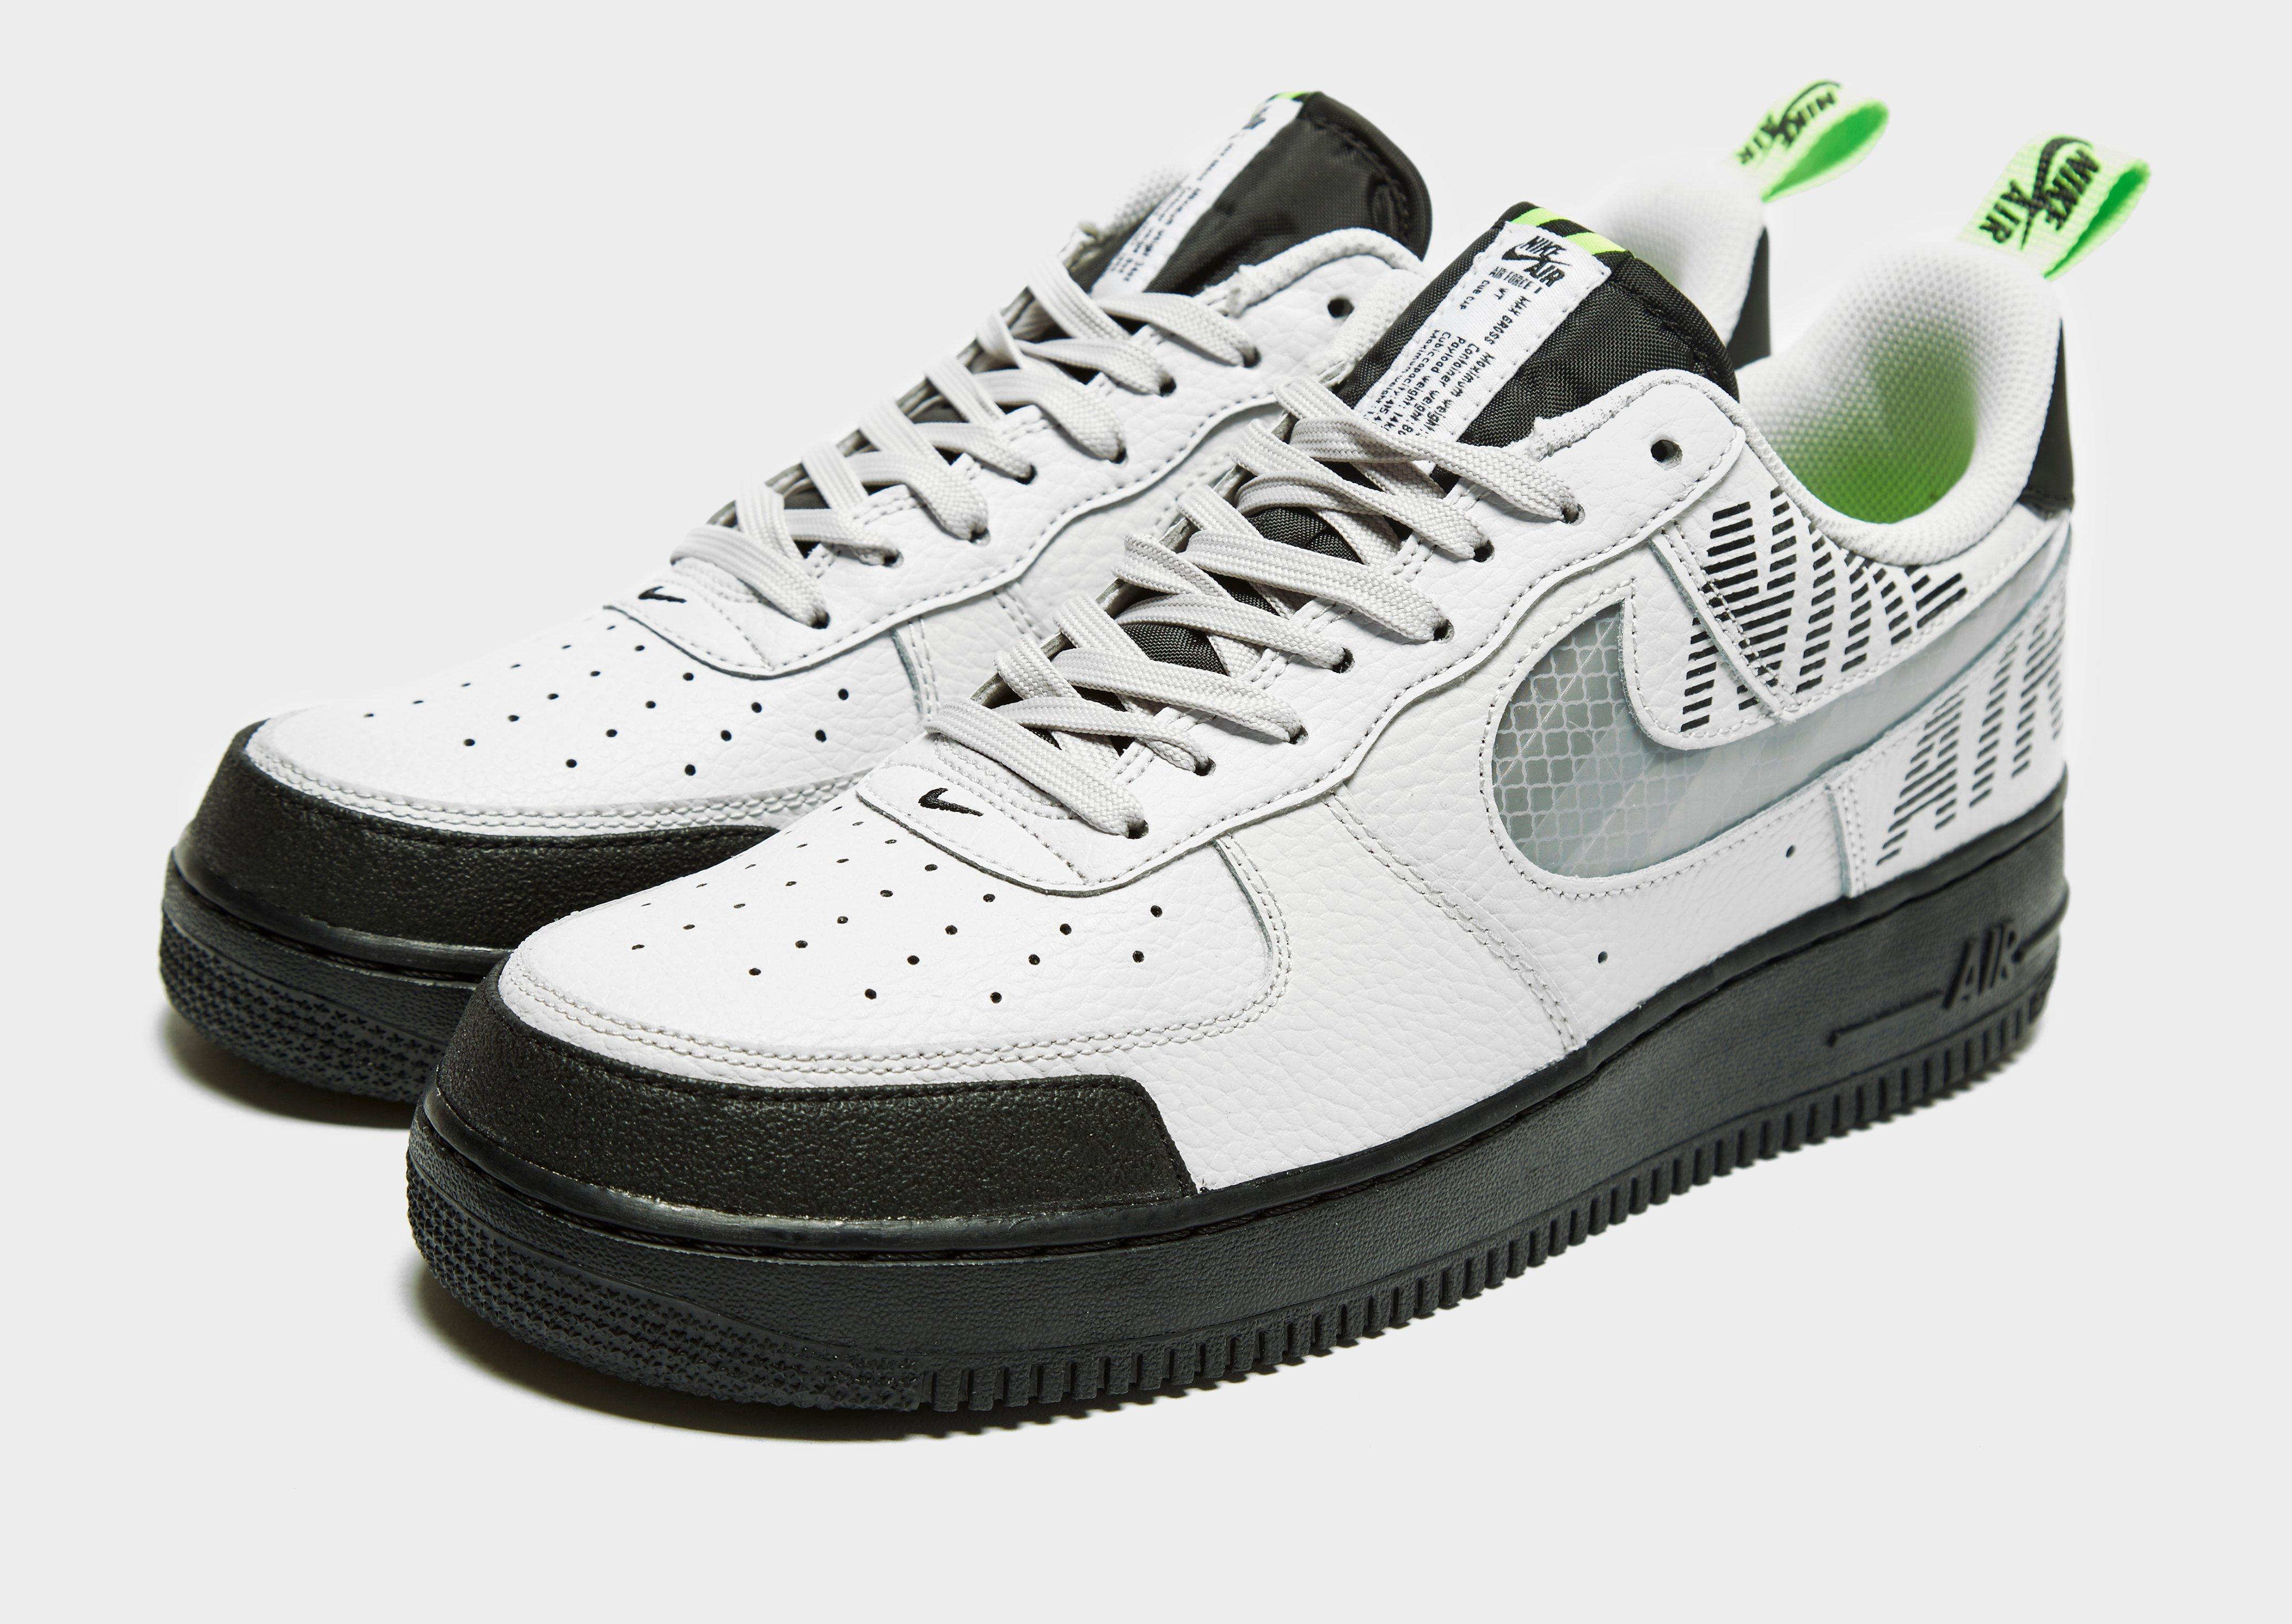 air force 1 utility jd sports